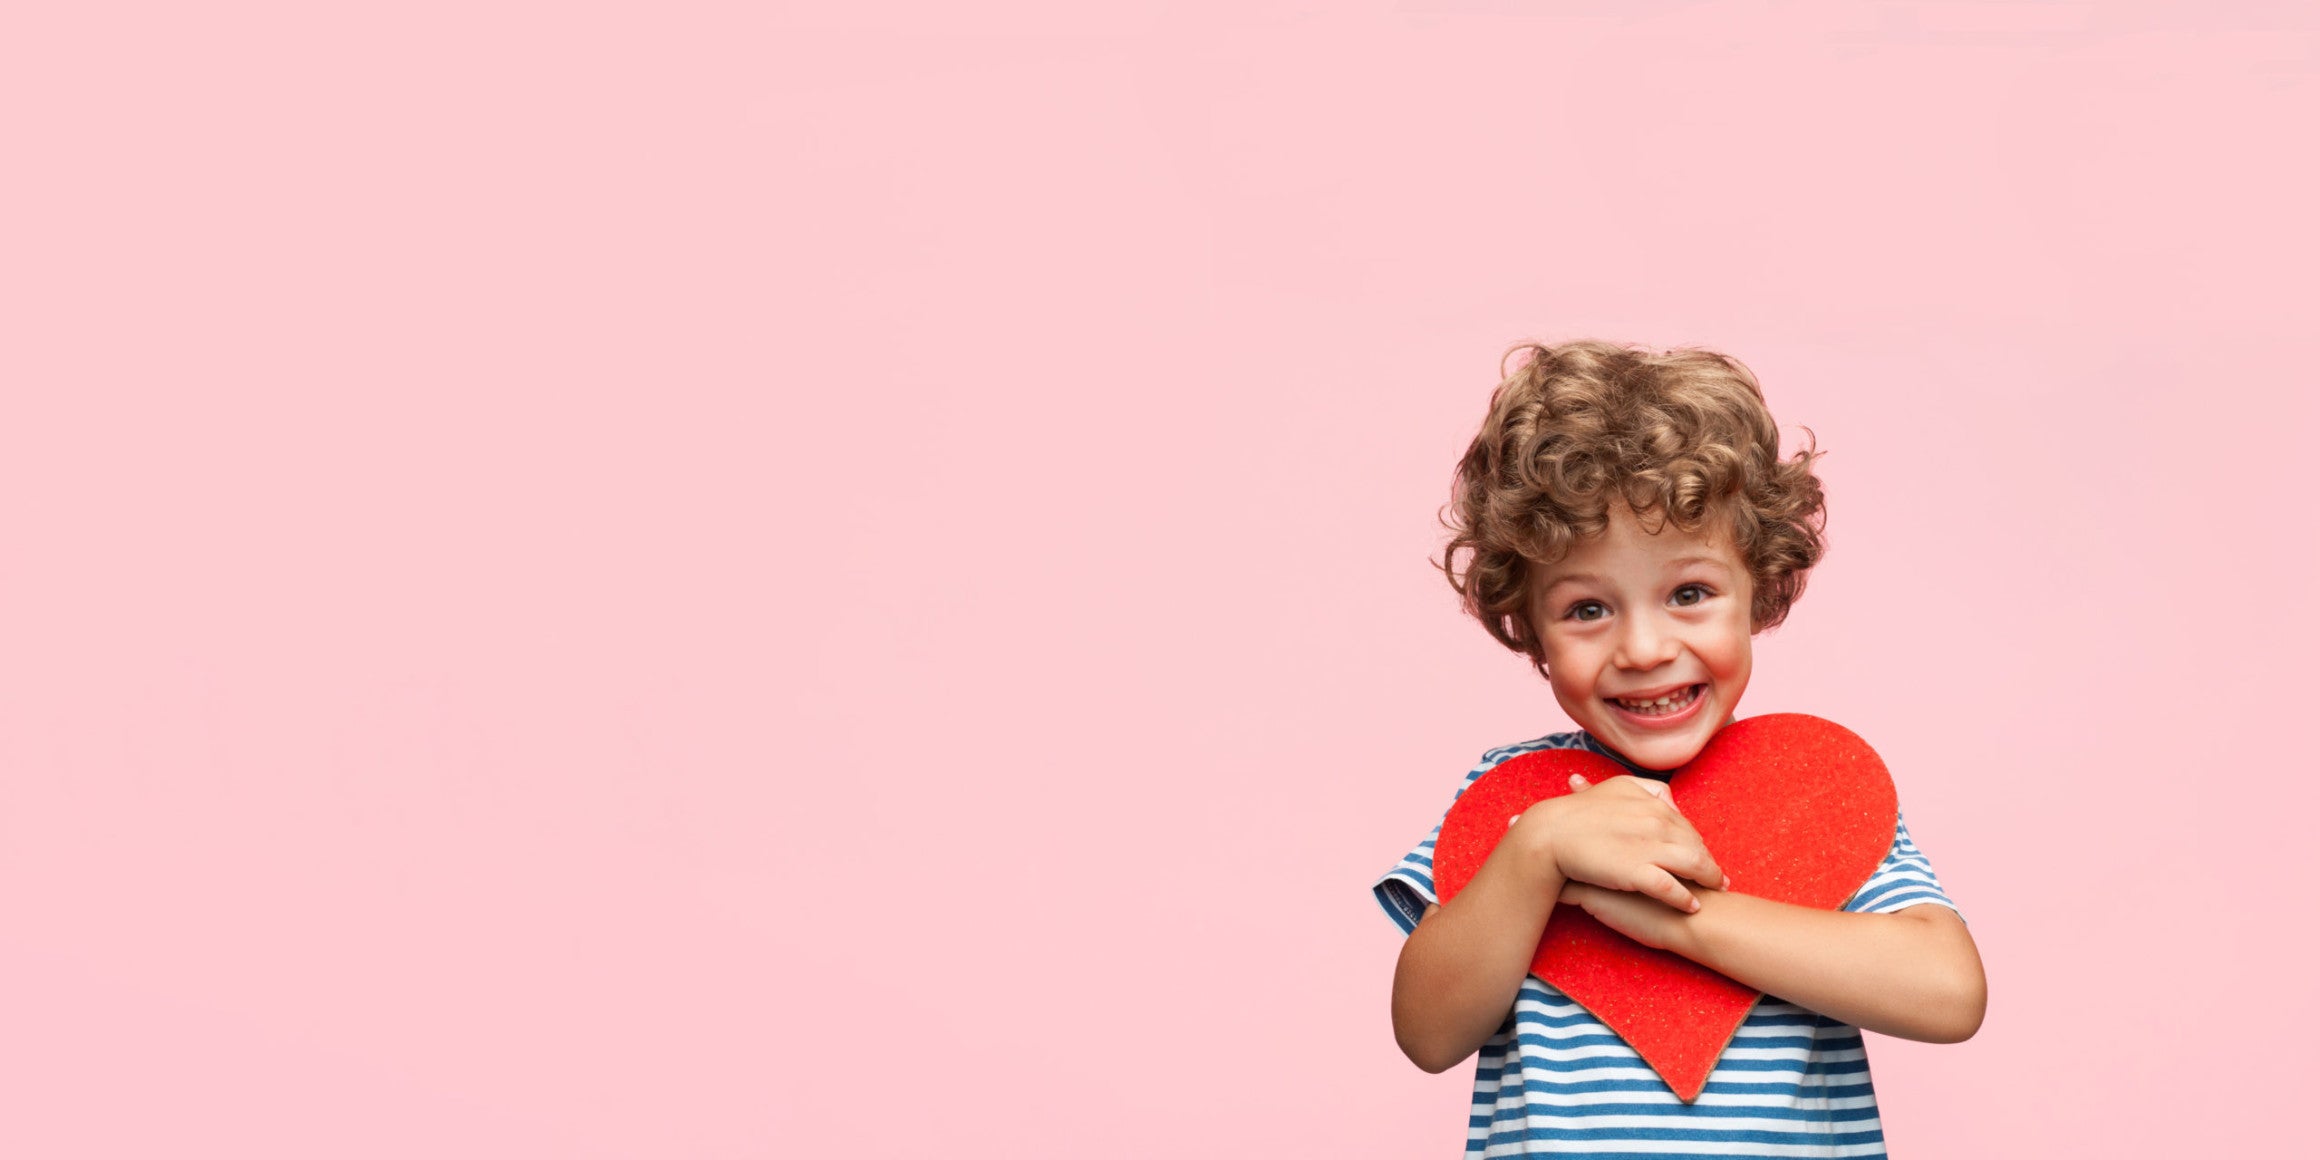 Charming boy posing with heart